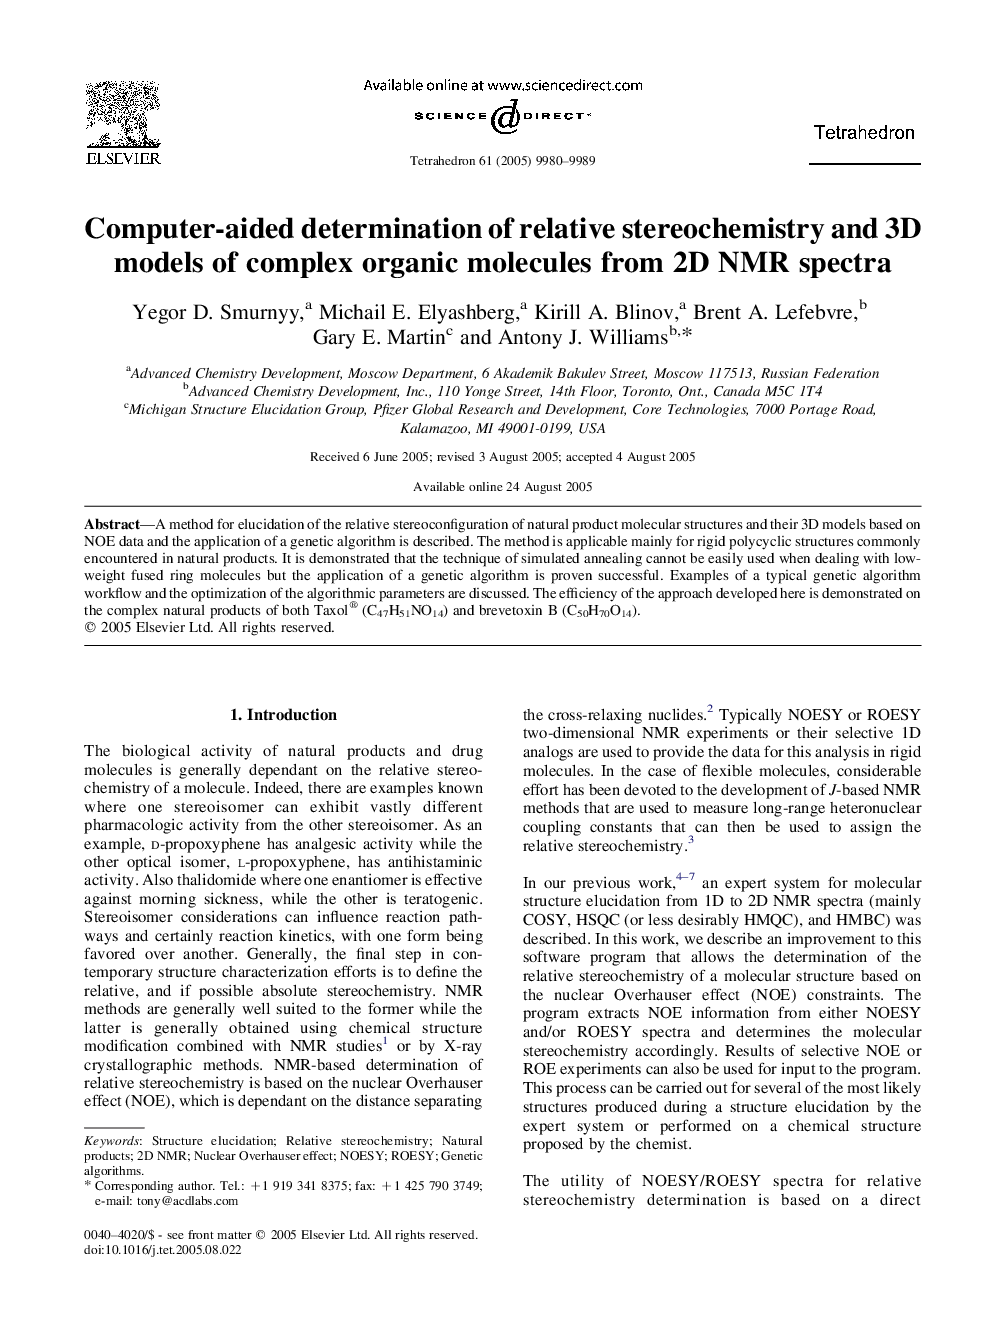 Computer-aided determination of relative stereochemistry and 3D models of complex organic molecules from 2D NMR spectra